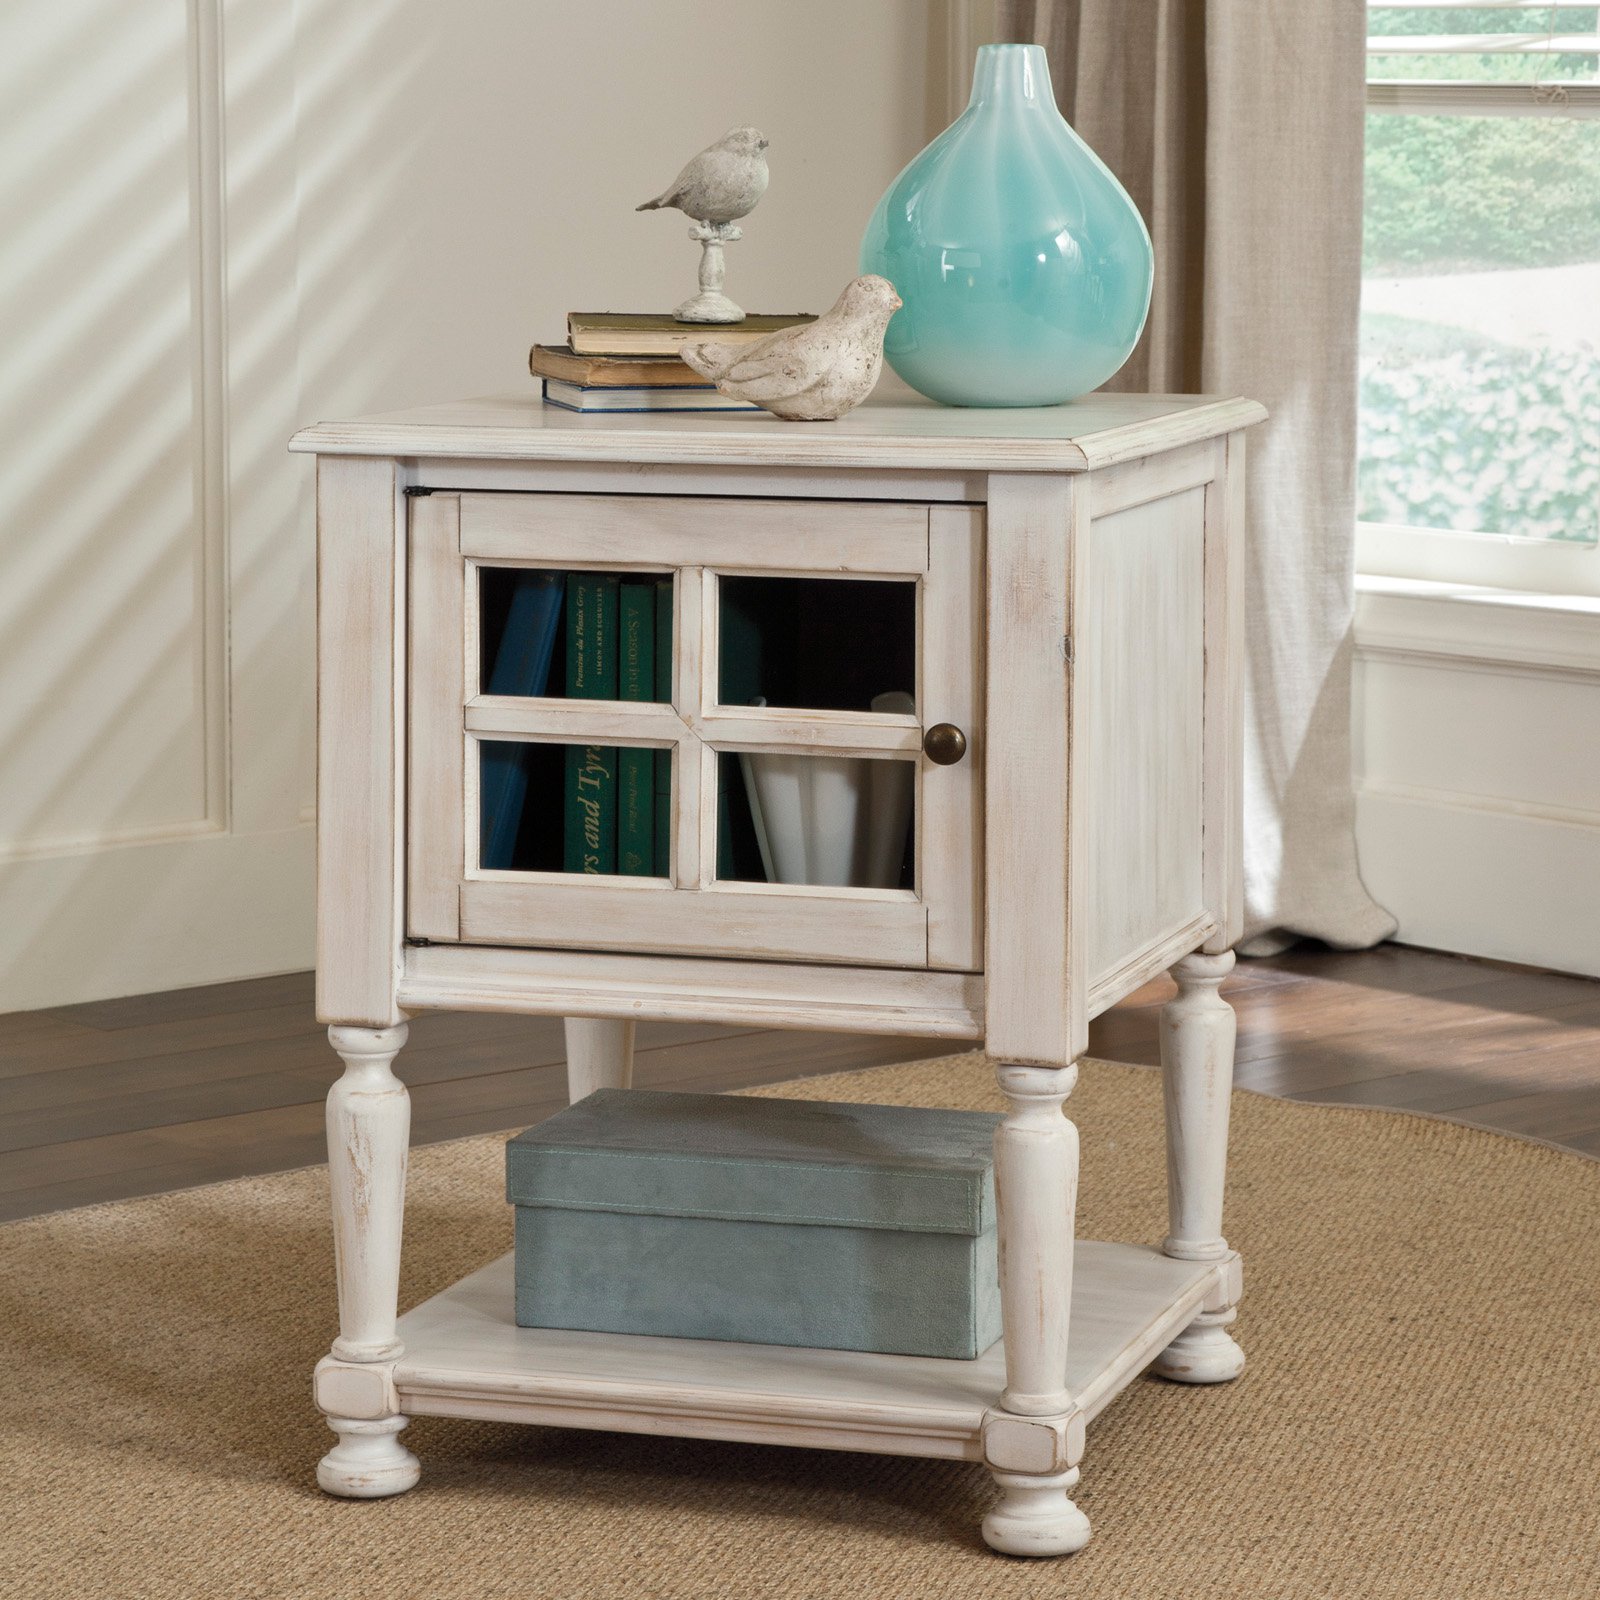 carly wpower chairside main power table wood broyhill scenic pike marvelous accent full size furniture good looking antique round hall target margate off white distressed end